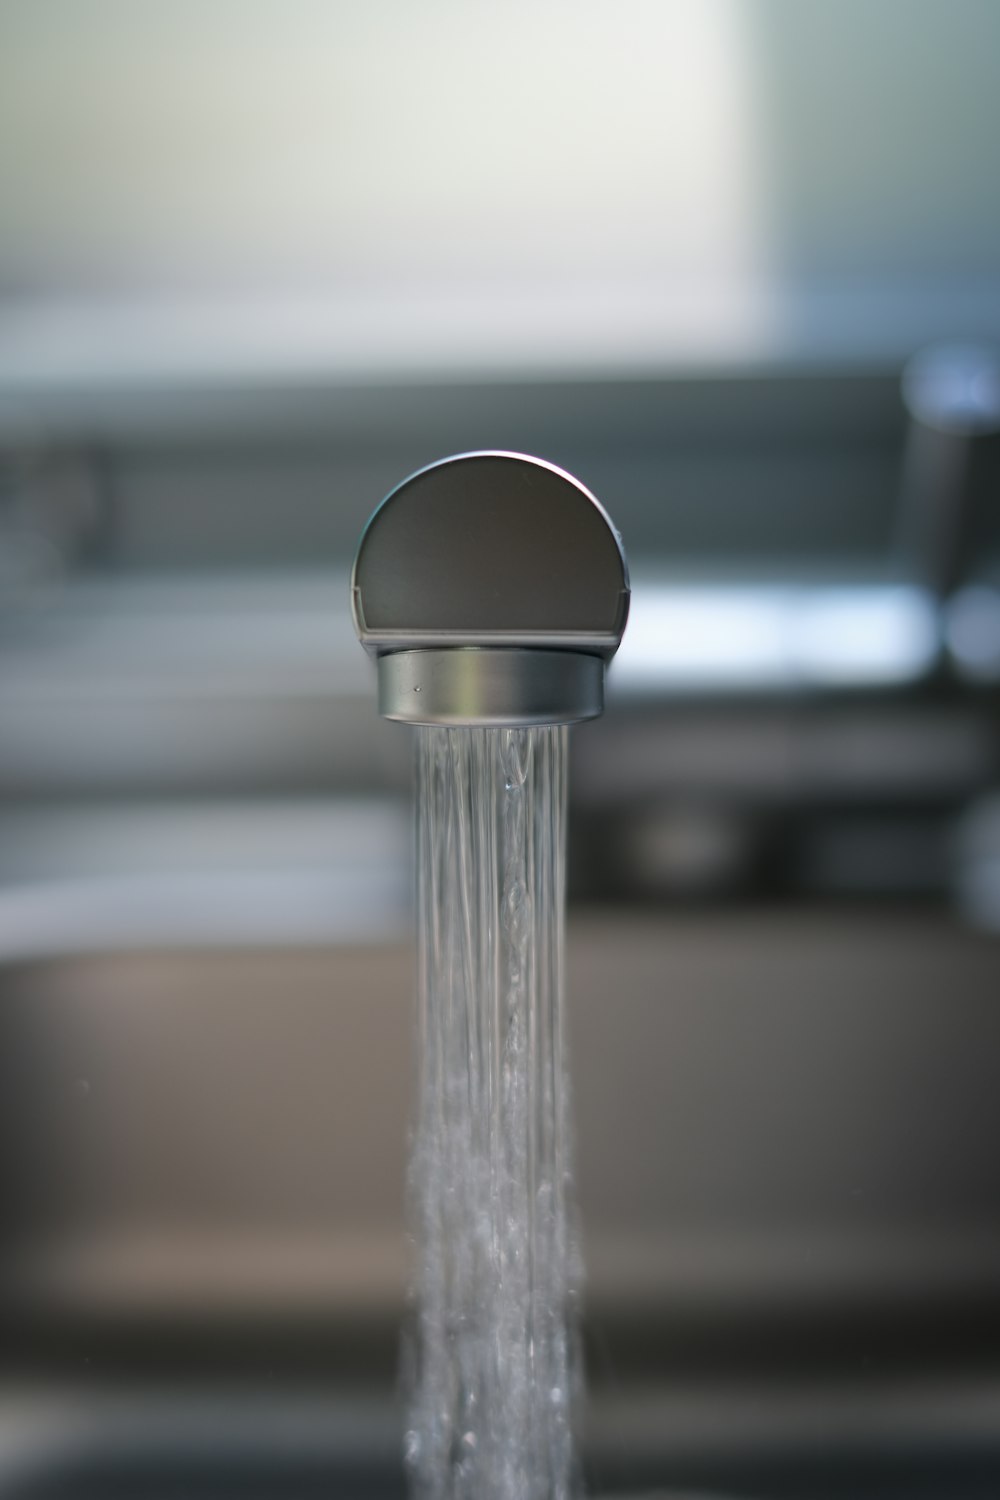 faucet with water running